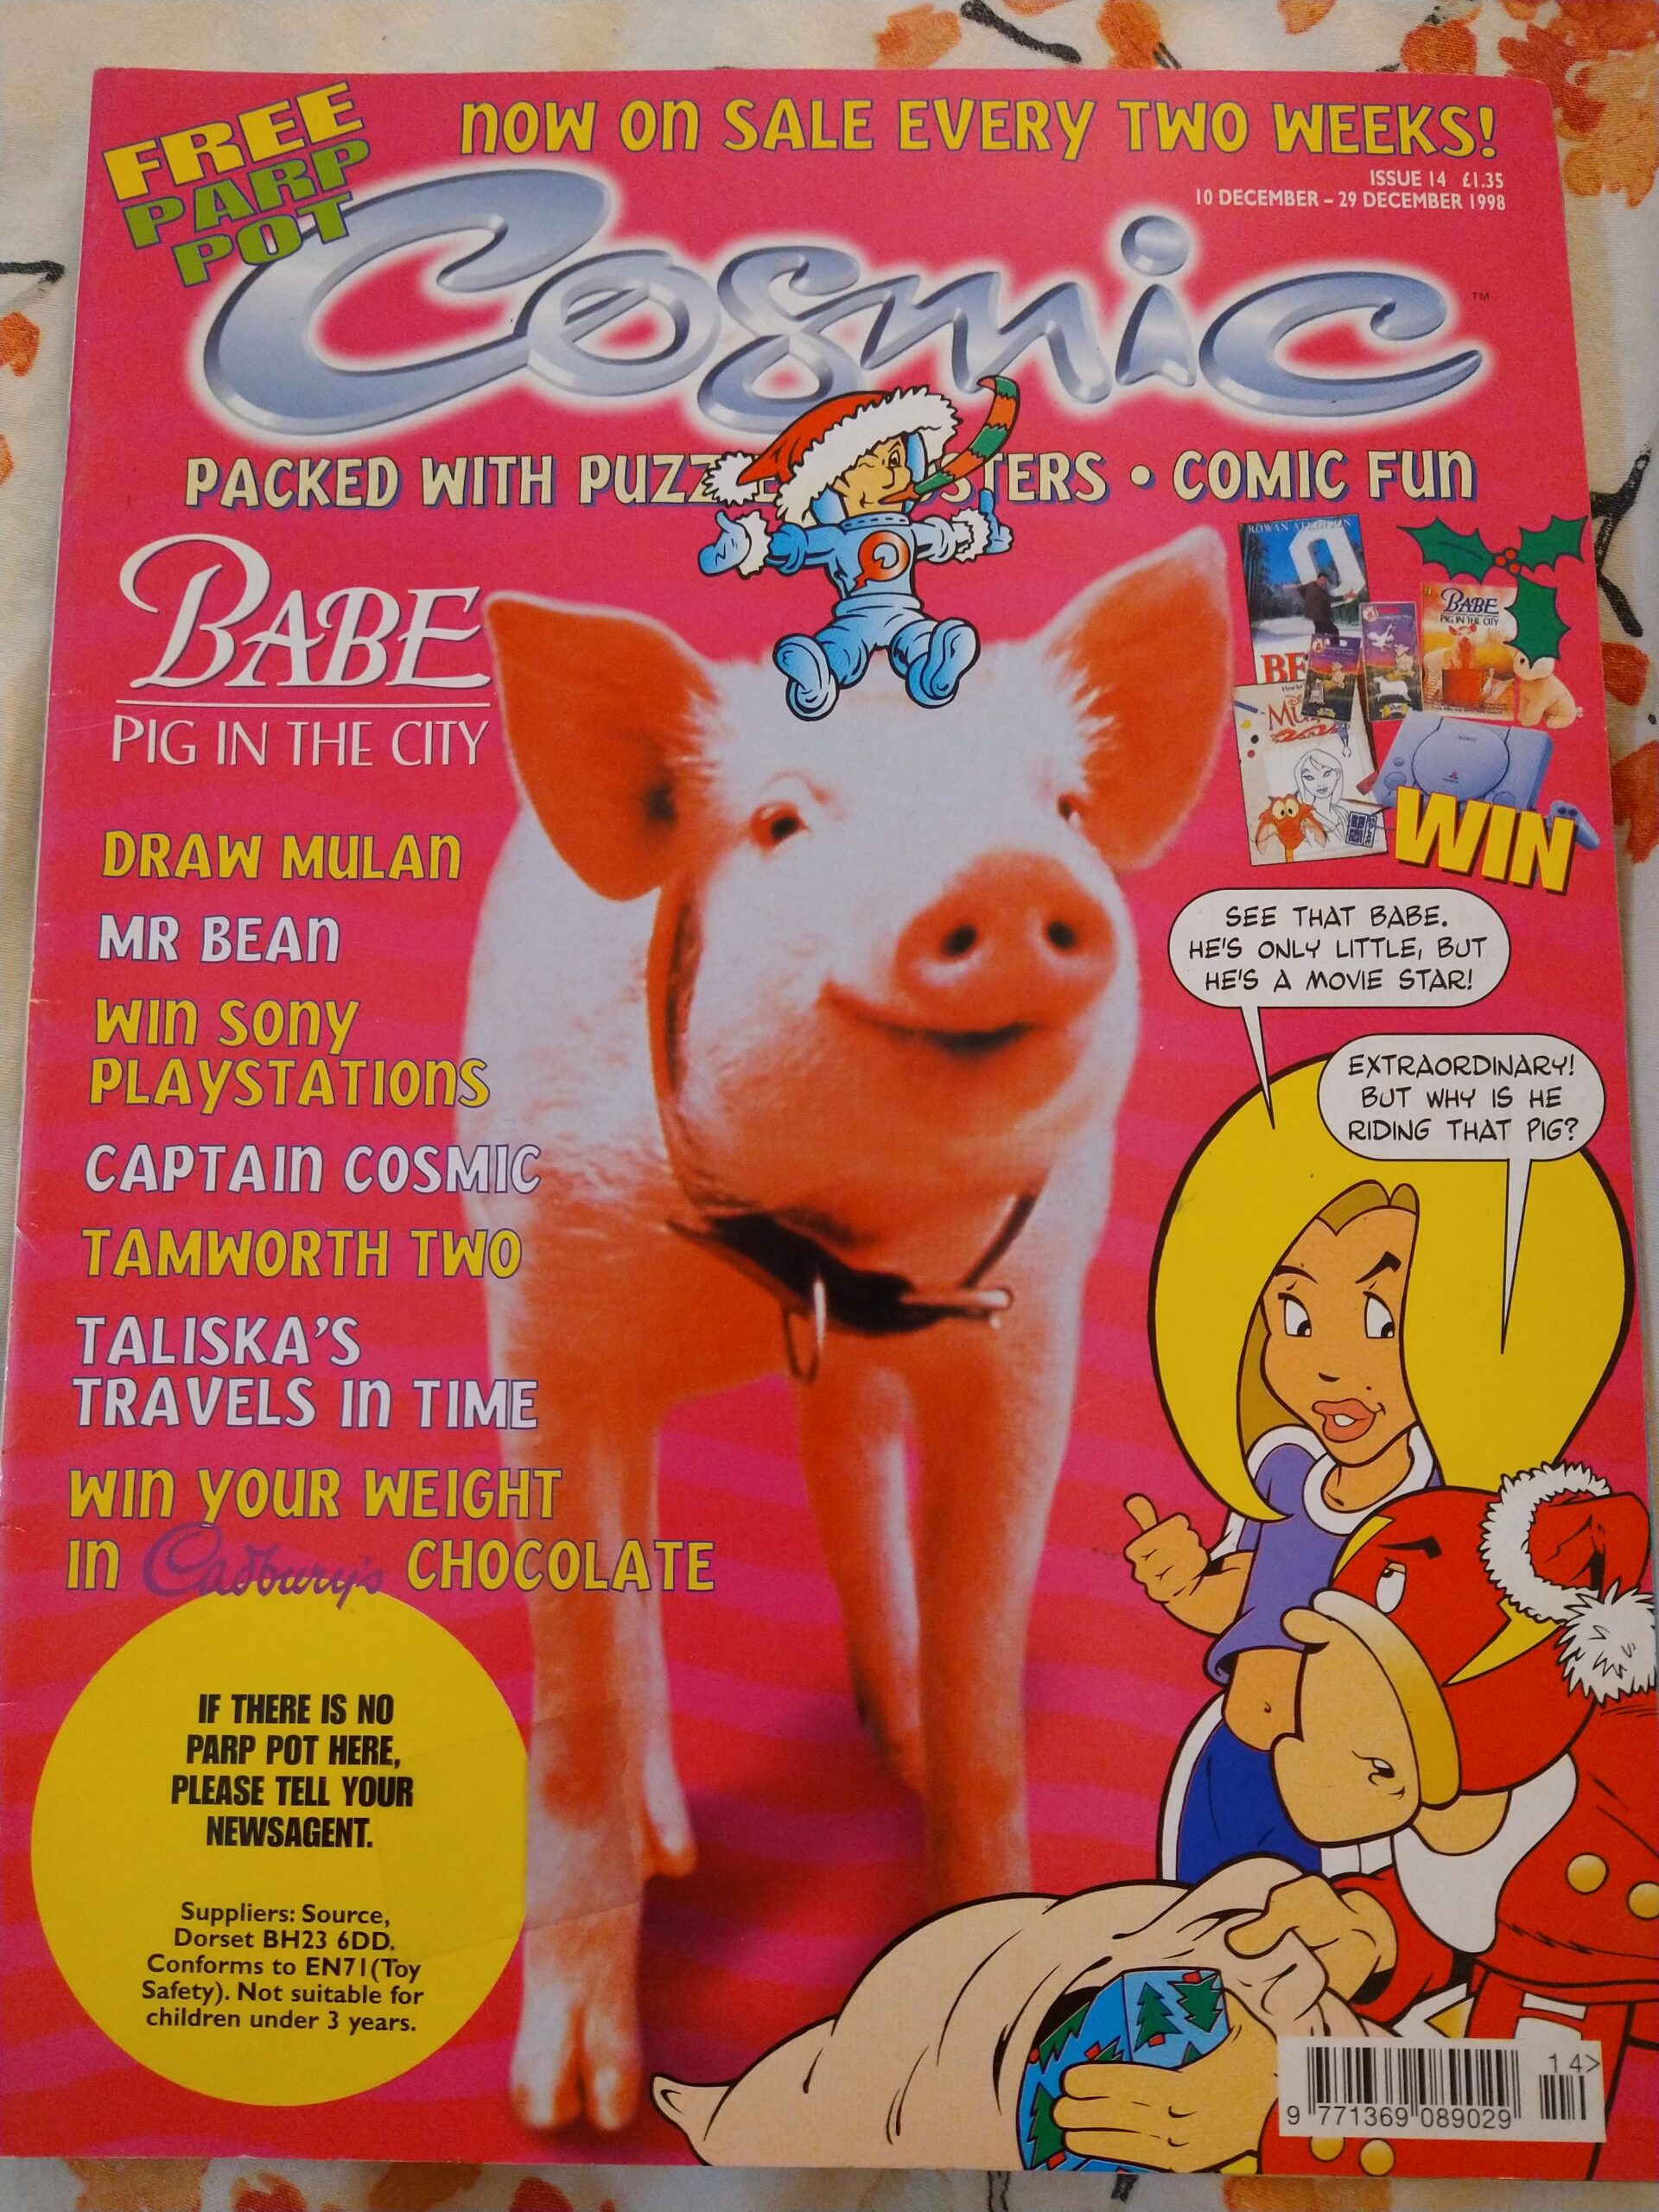 Cosmic Volume Two No. 14 - 10th - 29th December 1998